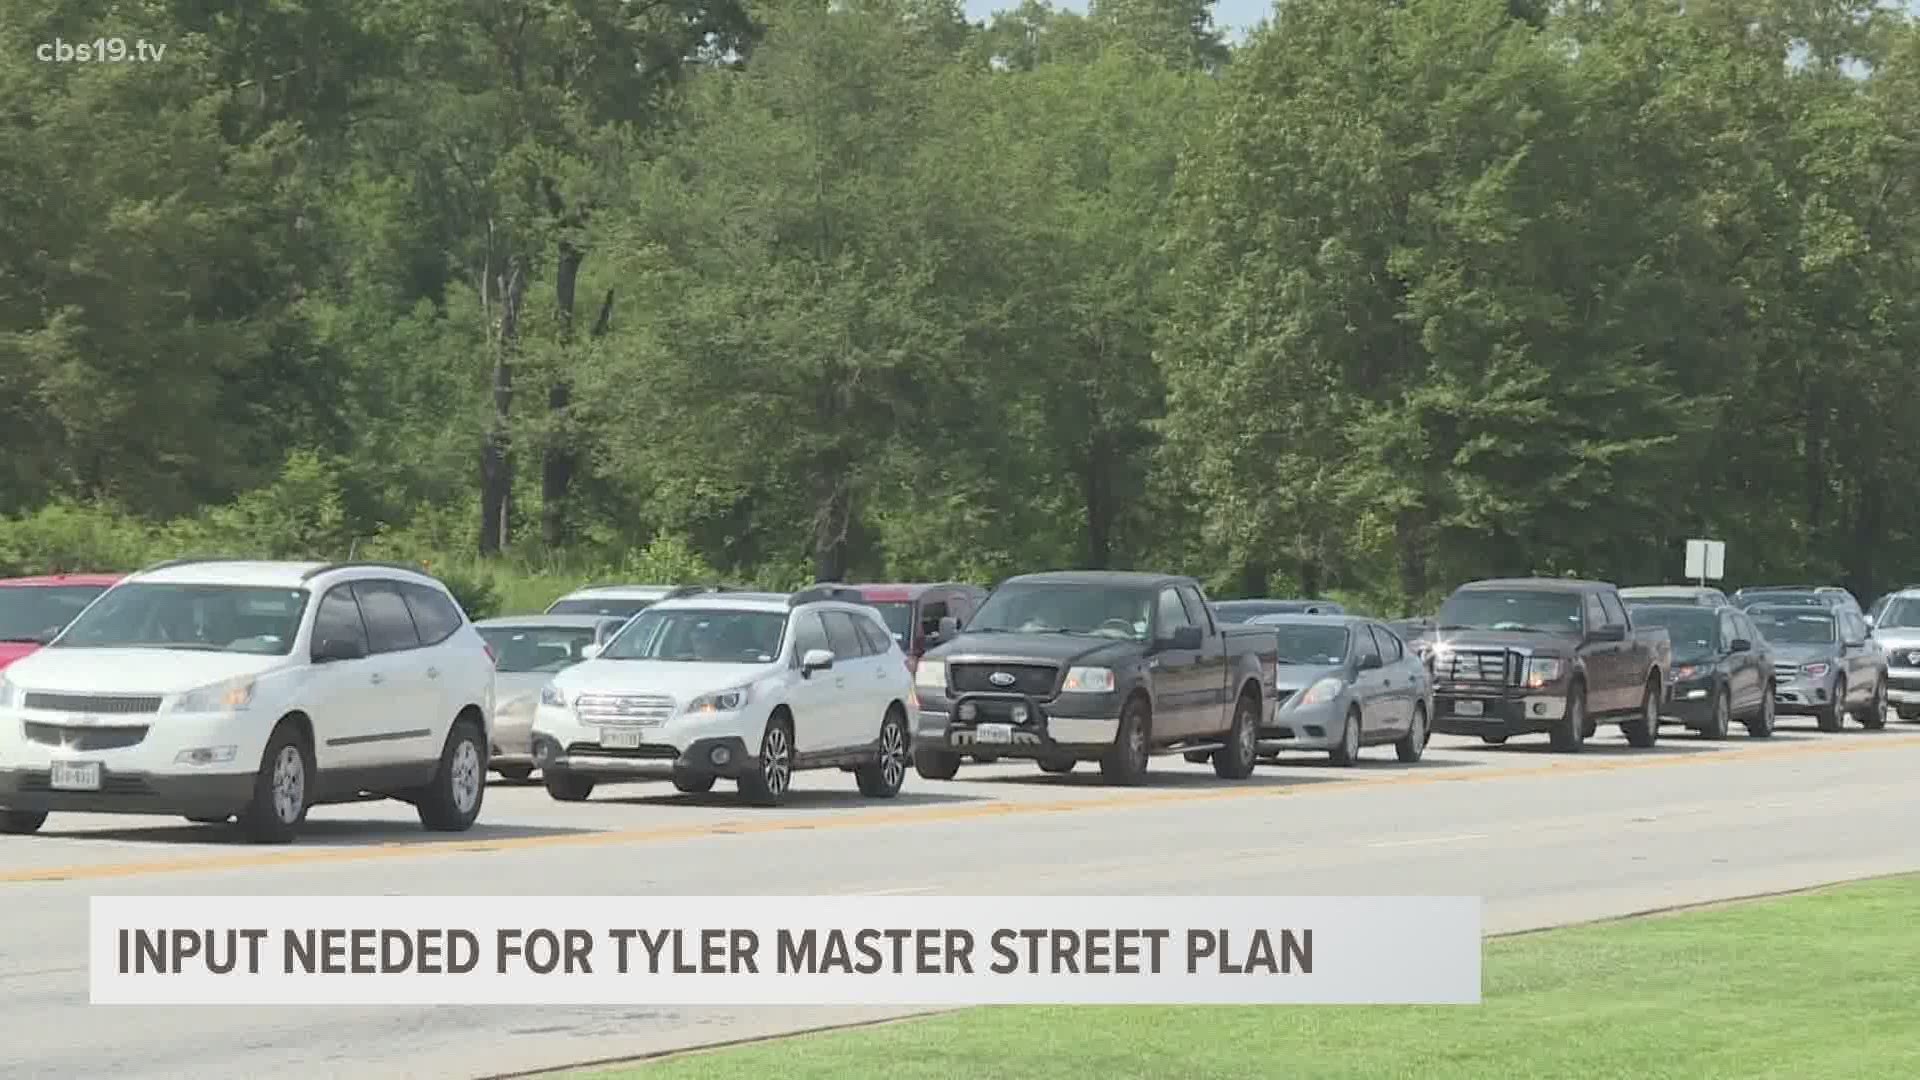 The public is invited to attend two virtual open houses to be held by the Tyler Area Metropolitan Planning Organization to update the Master Street Plan.